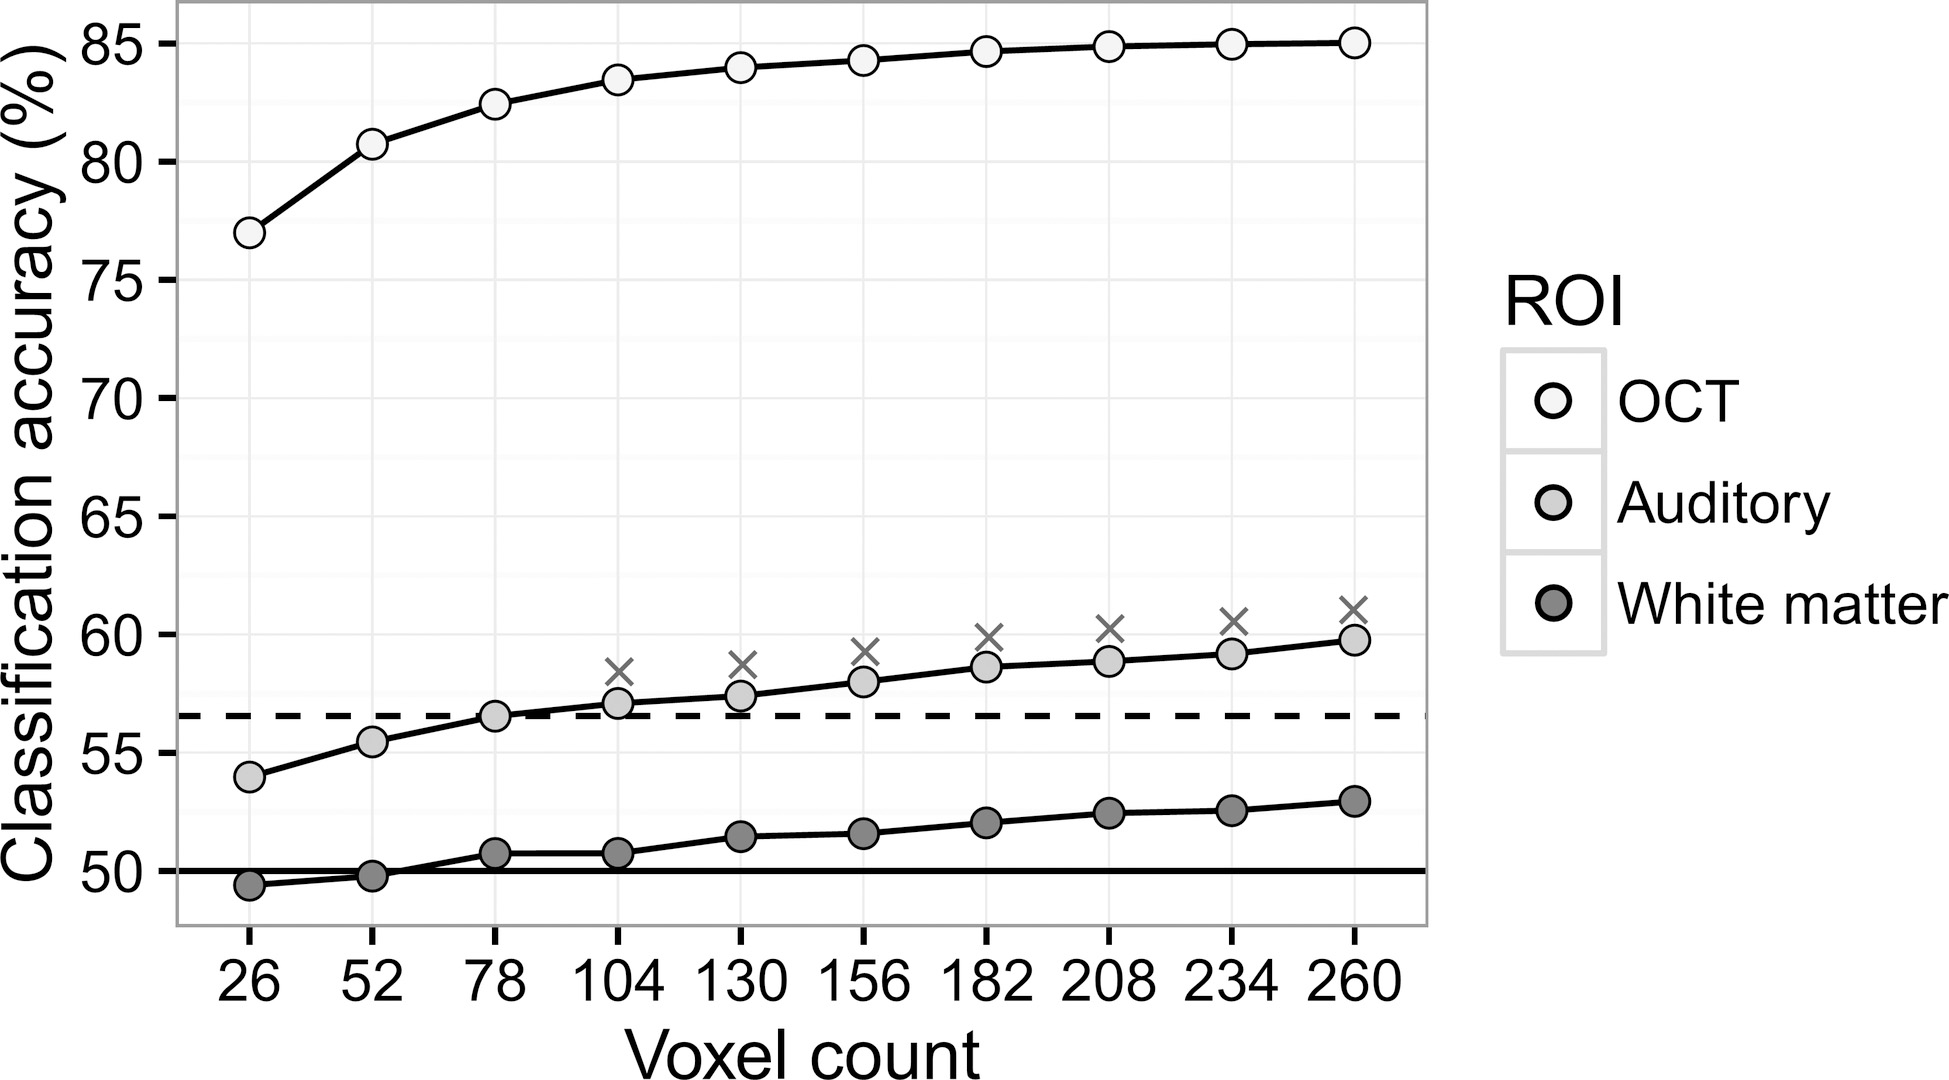 Accuracies for binary classification (face vs. house). The results are averaged across 6 subjects. The solid horizontal line indicates the chance-level accuracy (50%). The dashed line indicates the critical value (56.55%) for better-than-chance decoding based on the binomial test (a= 0.05), with 168 activation patterns involved for each subject. Crosses (“×”) indicate false positive results.